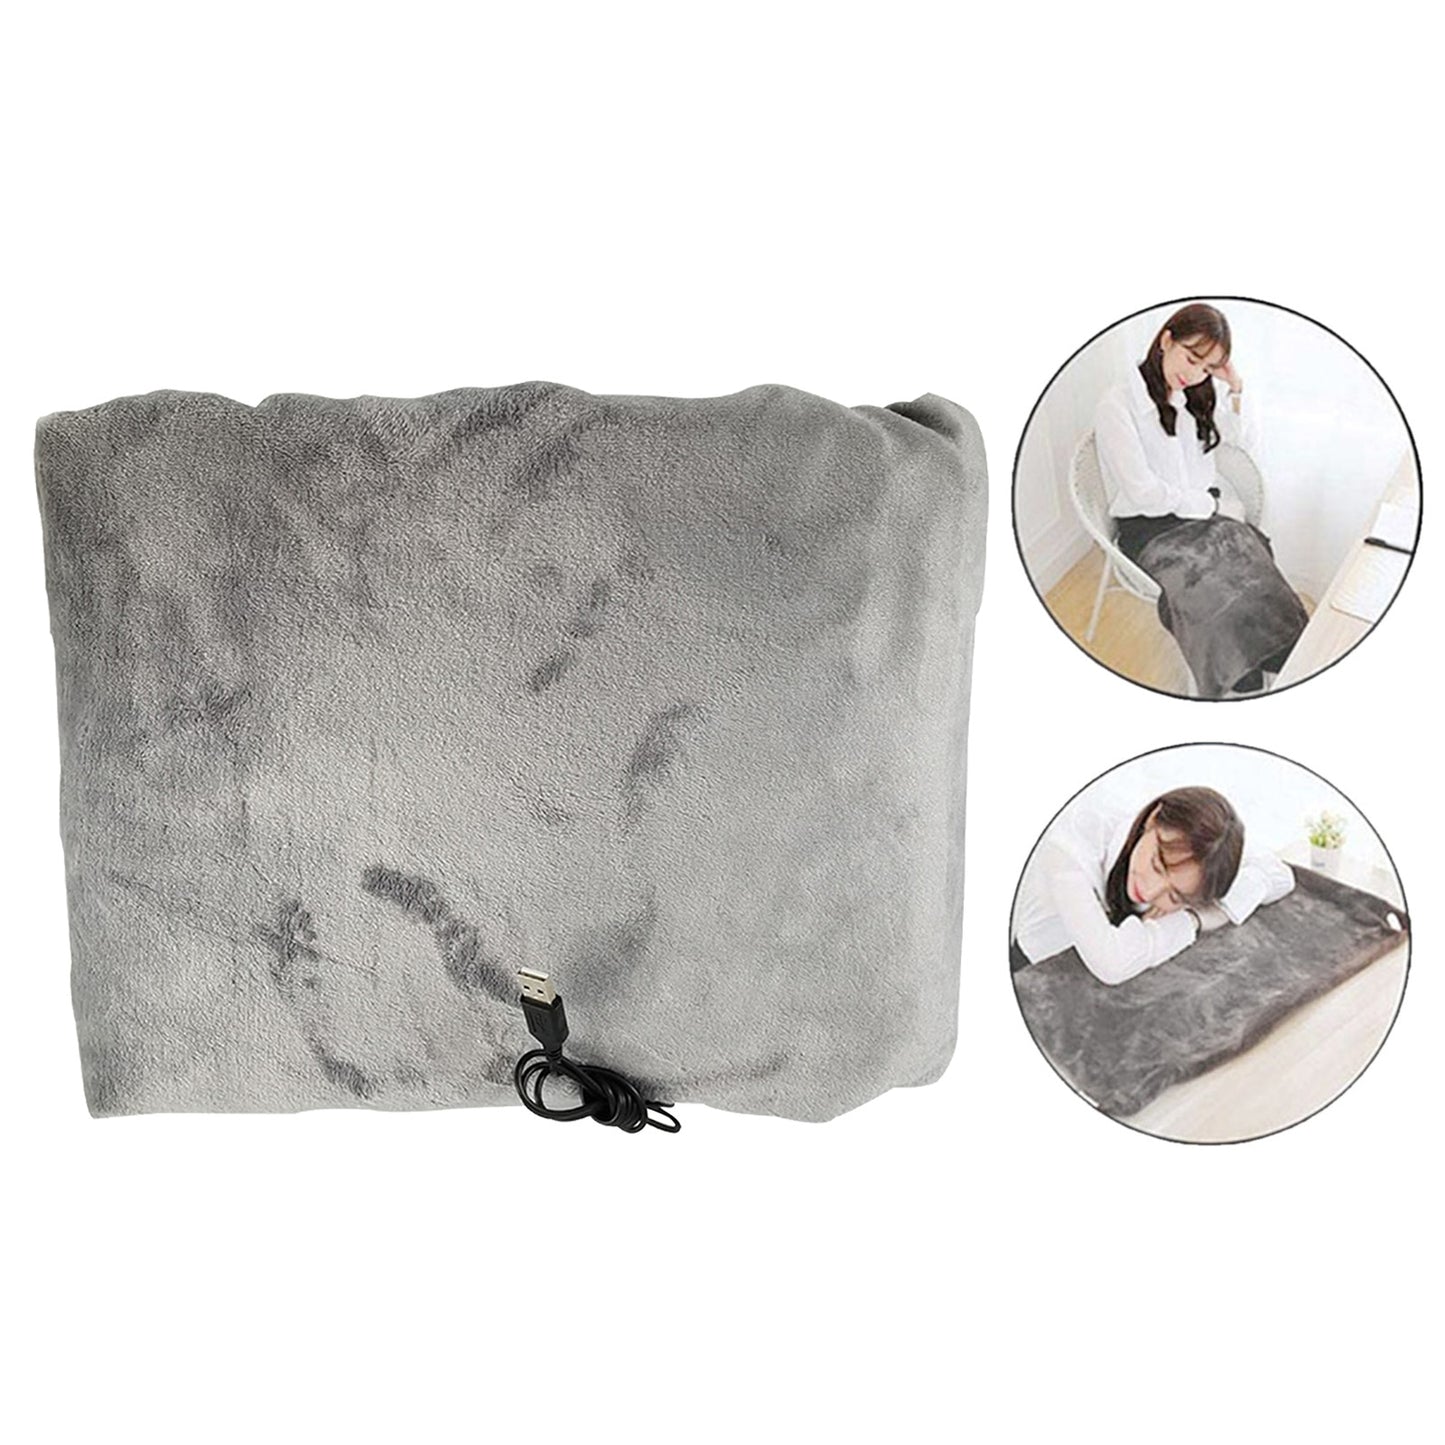 Flannel USB Electric Blanket Heated Scarf Overheating Protection Cushion 39x28 Inch